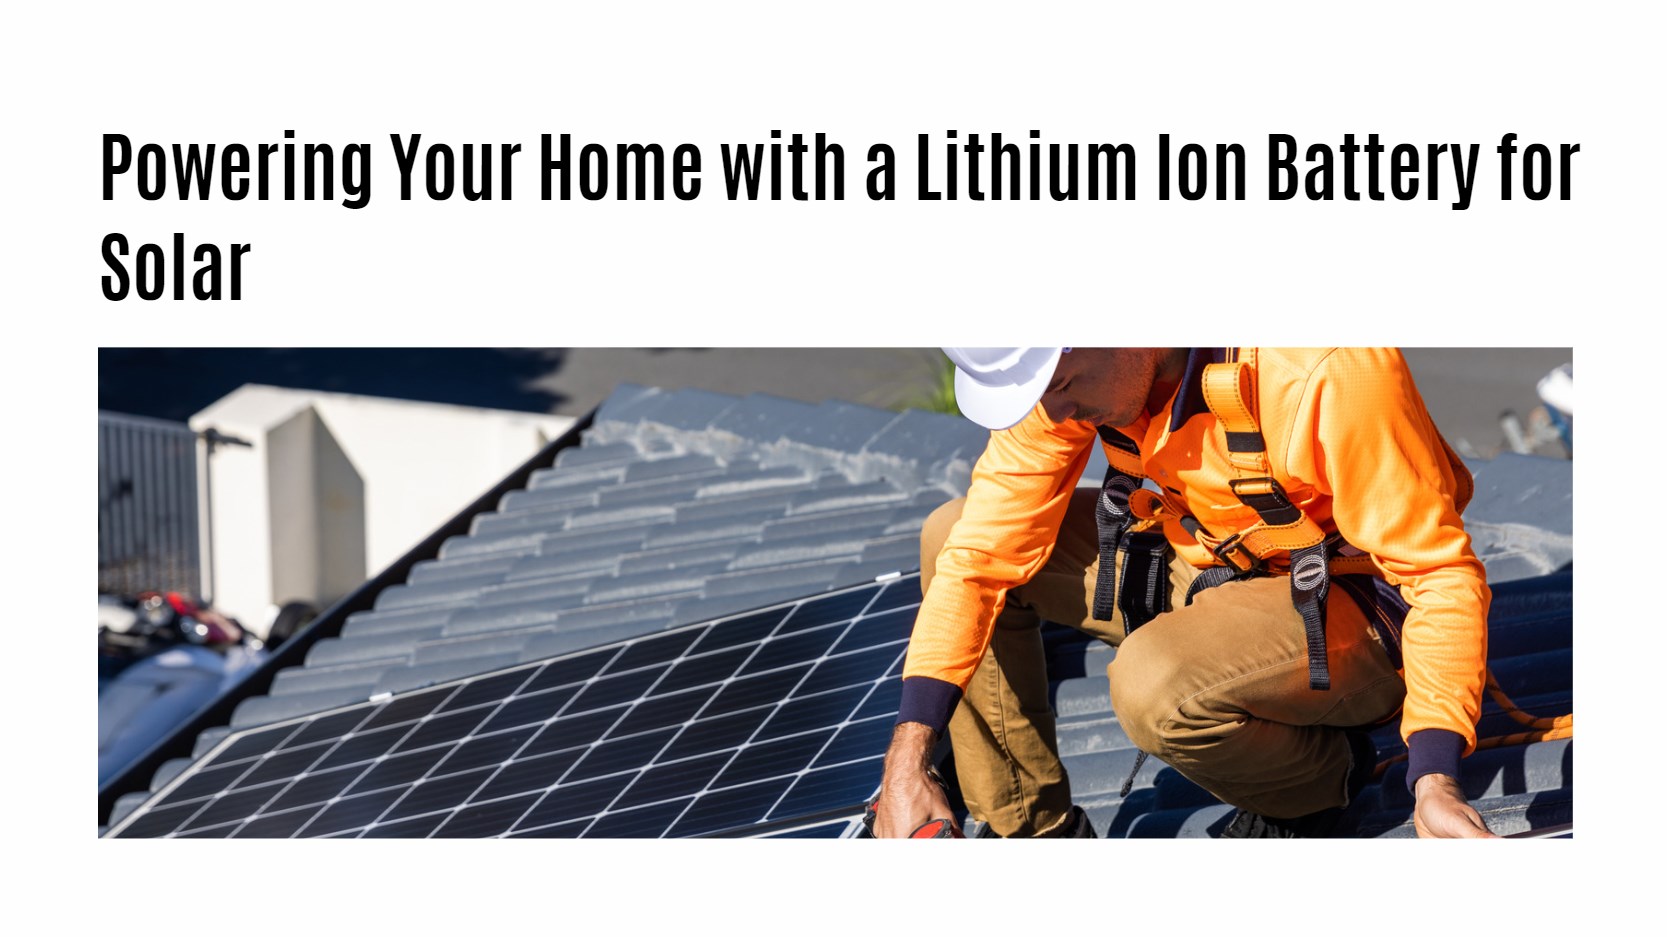 Powering Your Home with a Lithium Ion Battery for Solar